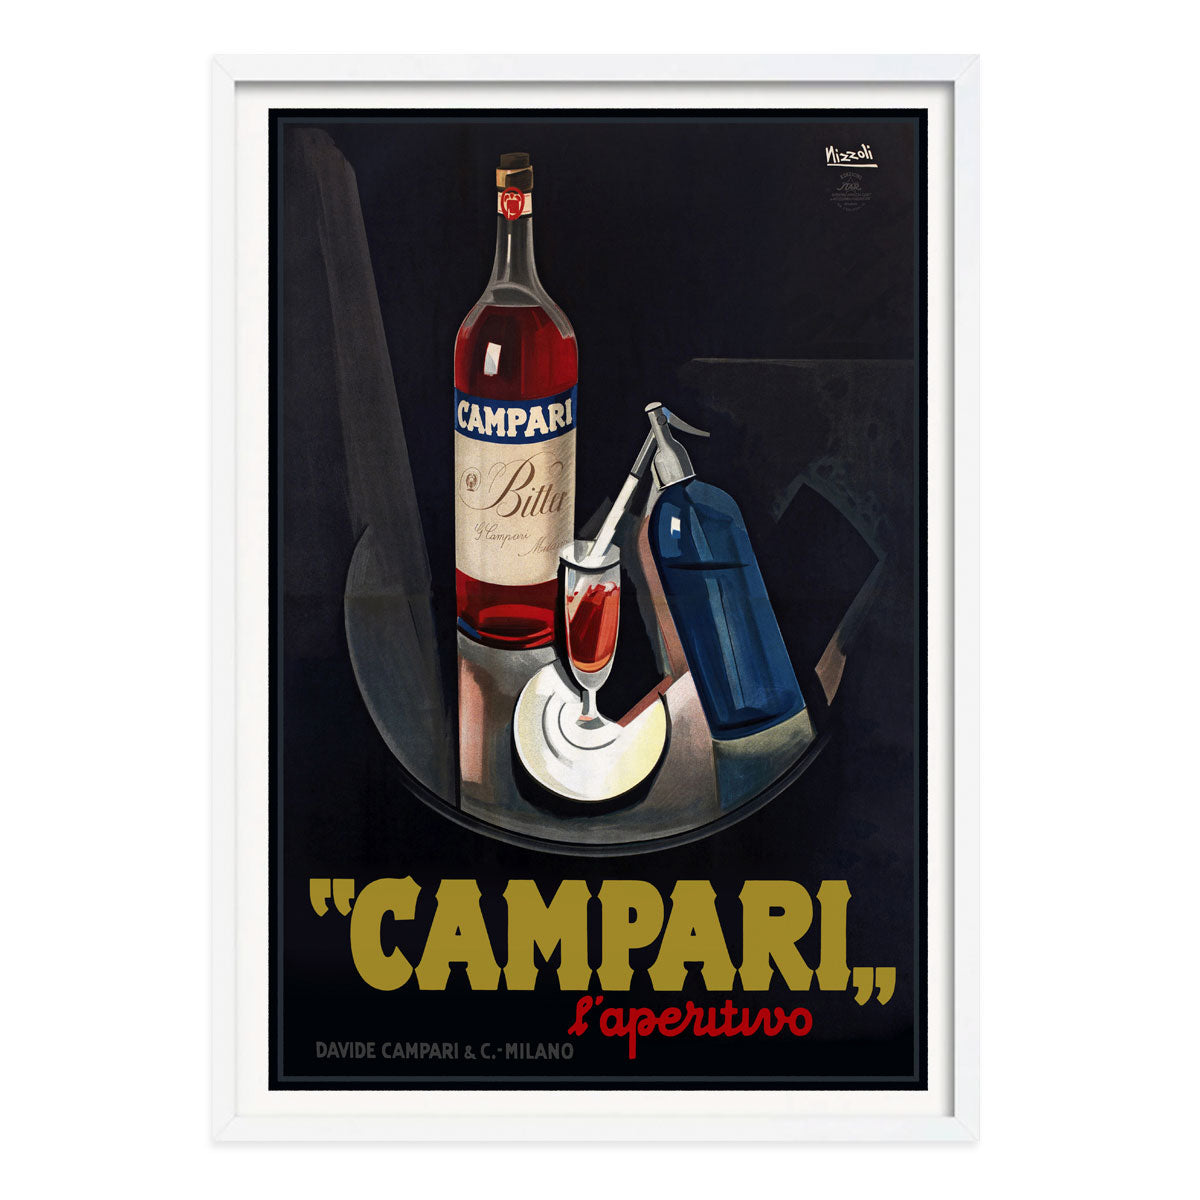 Campari l'aperitivo retro vintage poster print in white frame from Paces We Luv